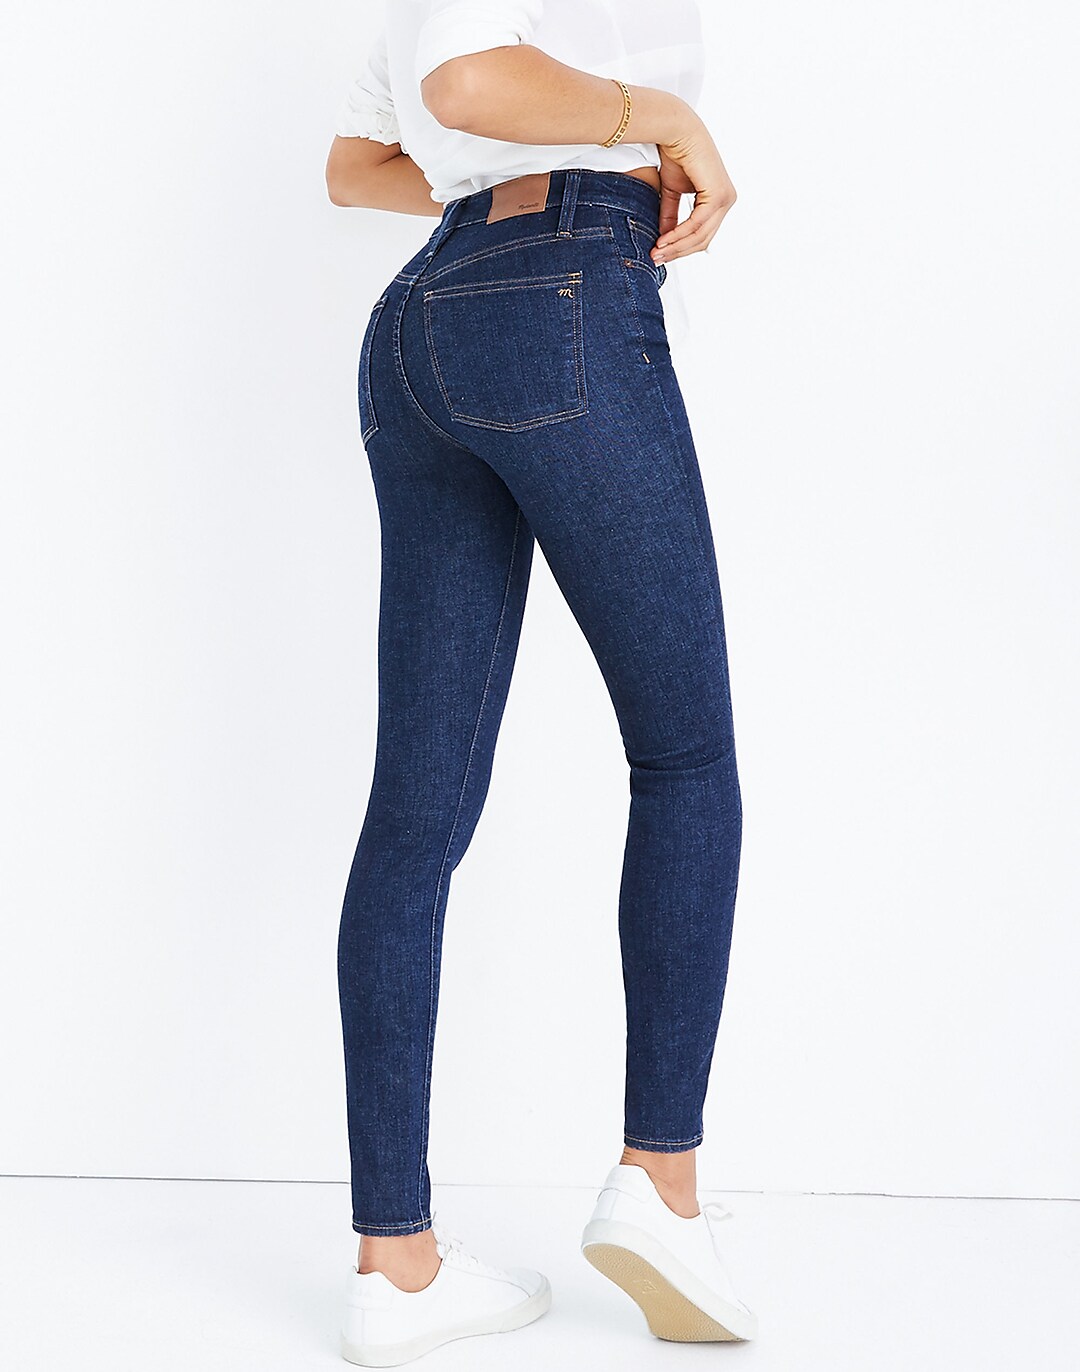 Women's Tall Curvy High-Rise Skinny Jeans in Lucille Wash